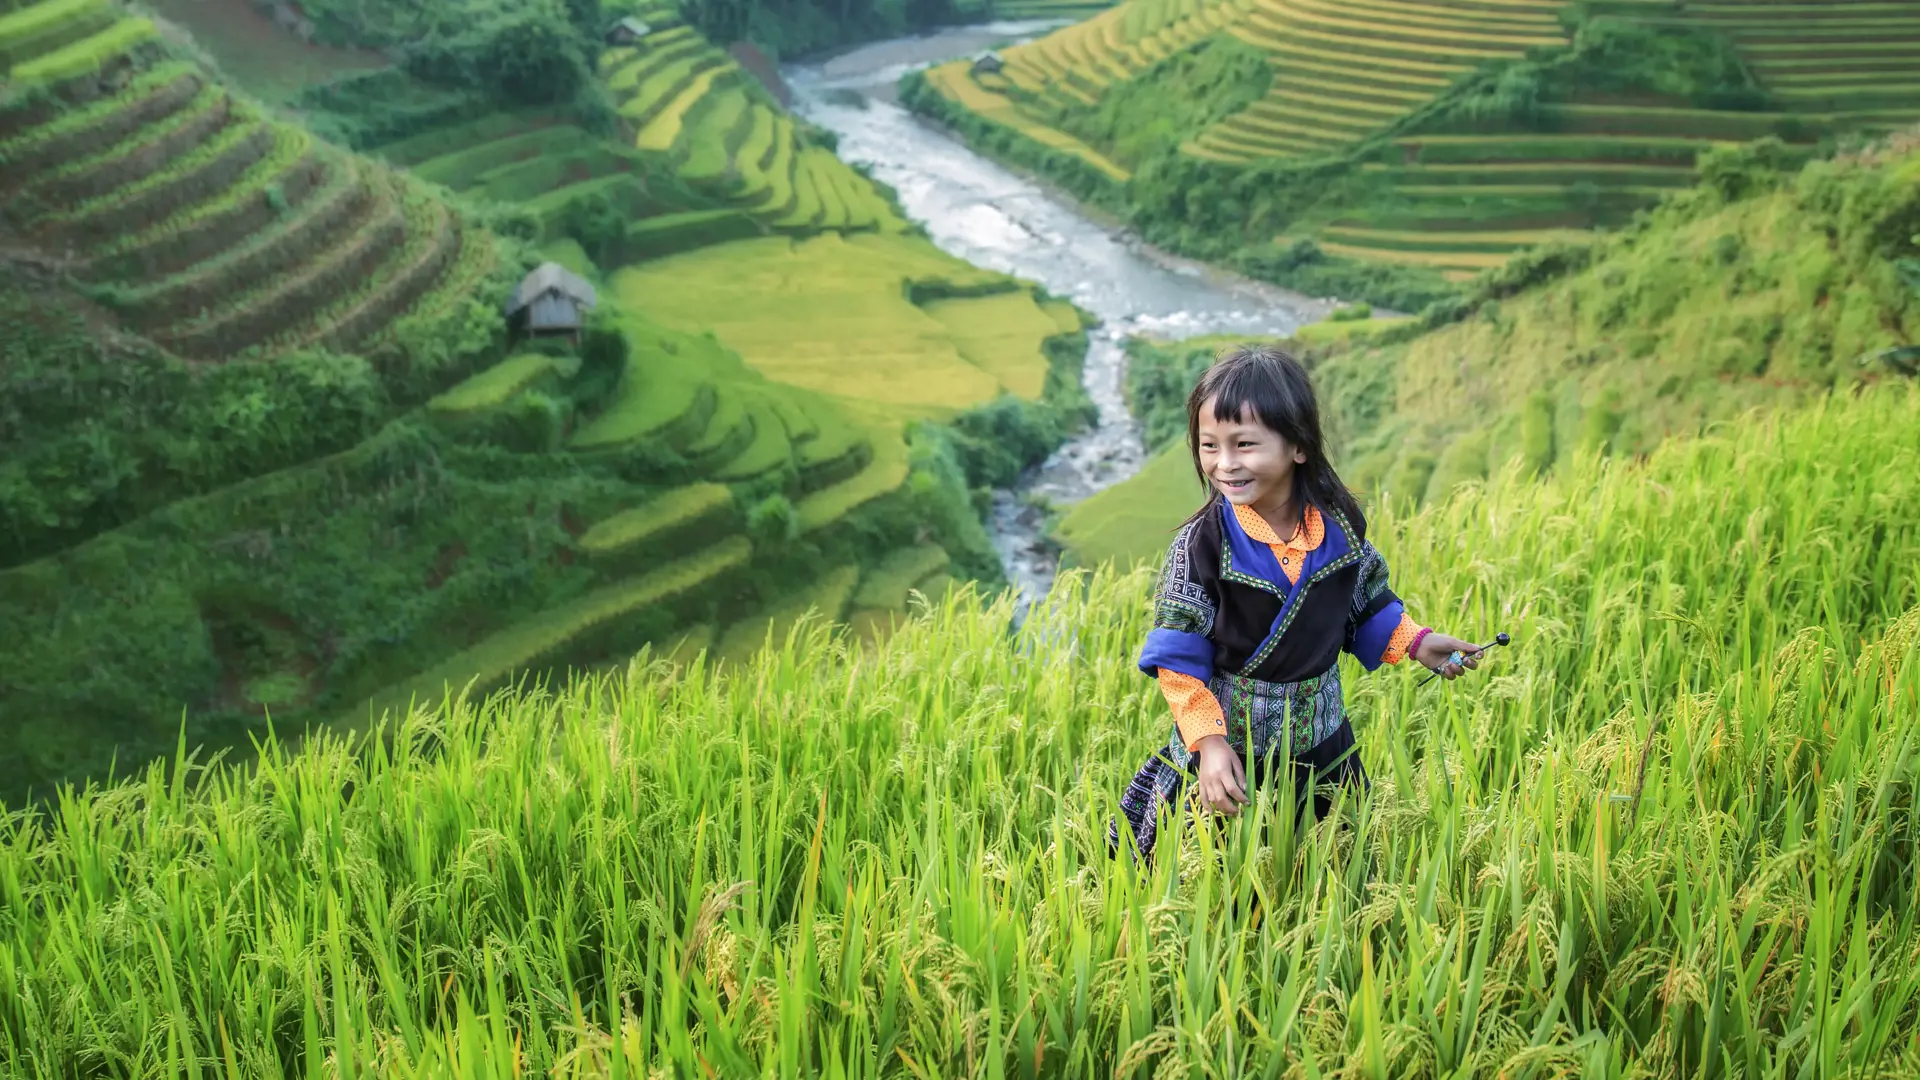 shutterstock_319942607 Girl in the terrace rice farm with countryside background.jpg